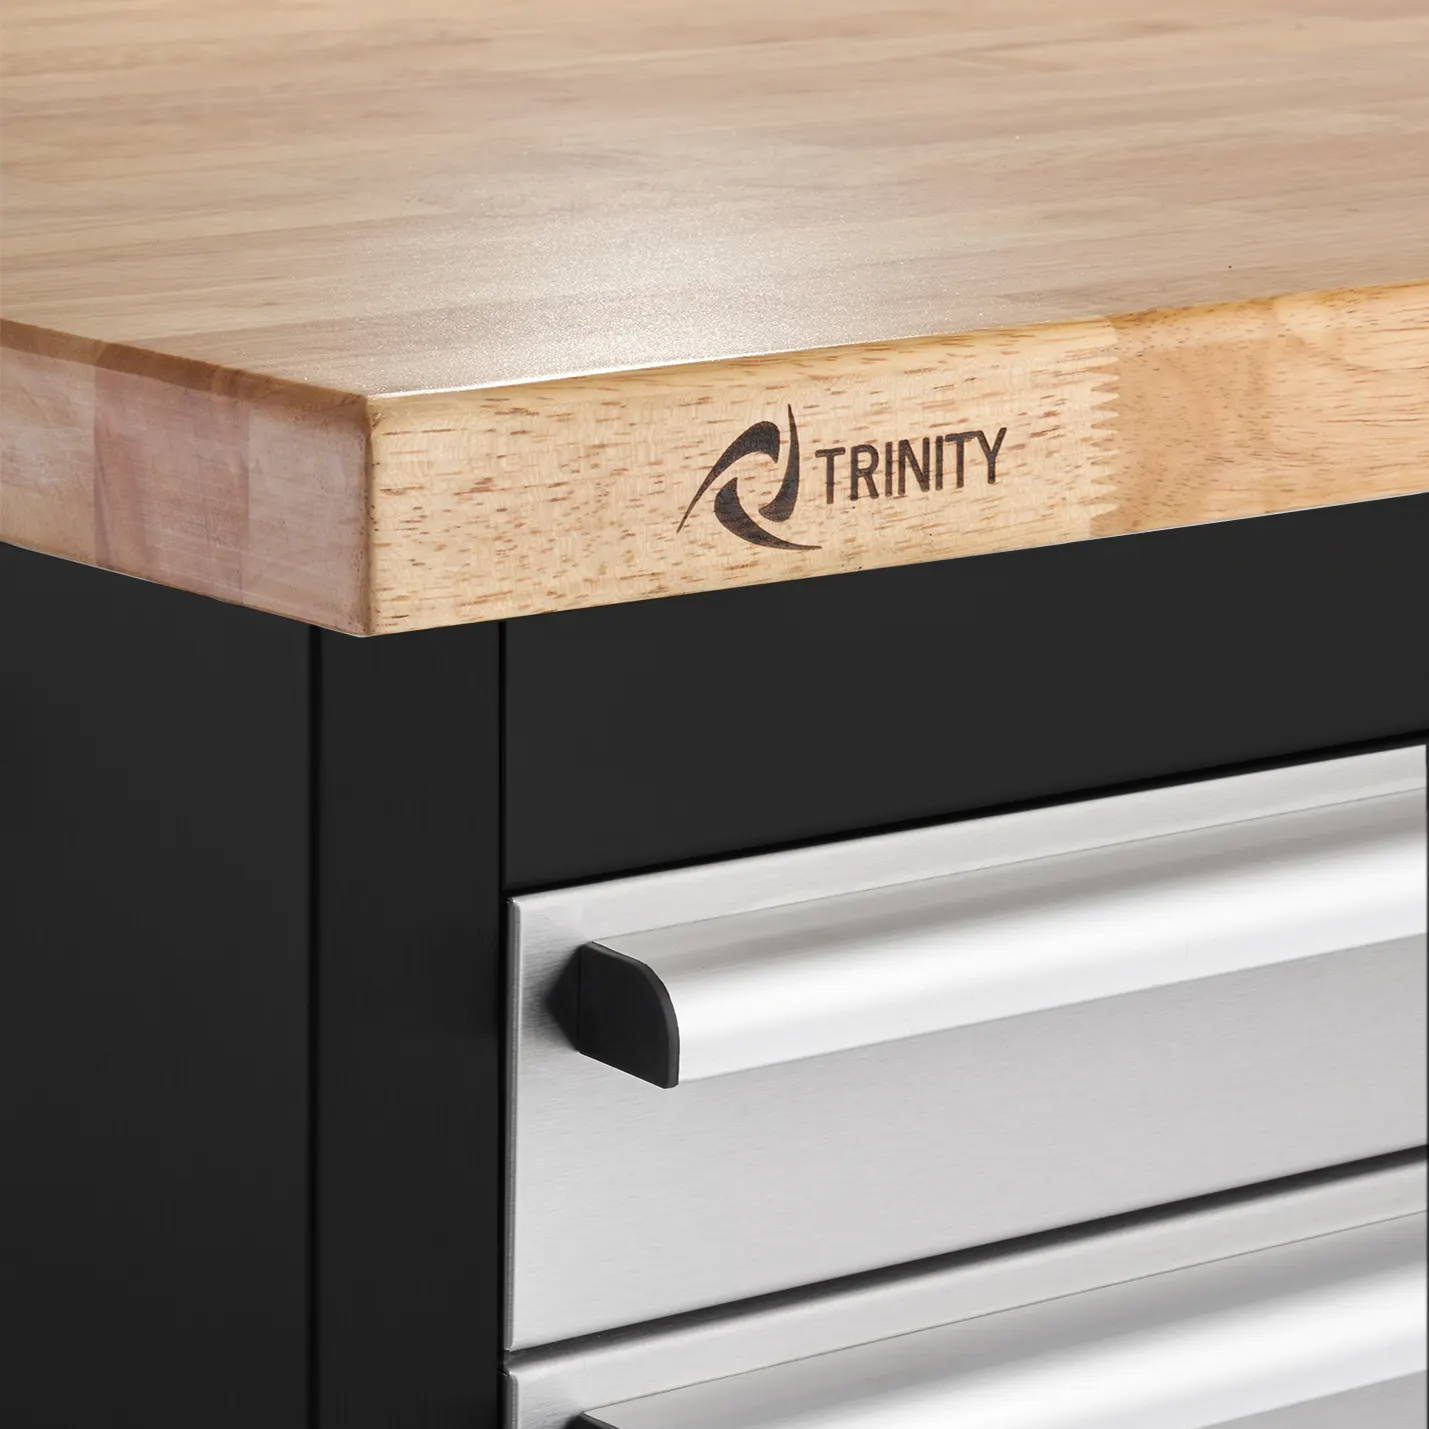 1.5 inch thick solid wood top with trinity mark